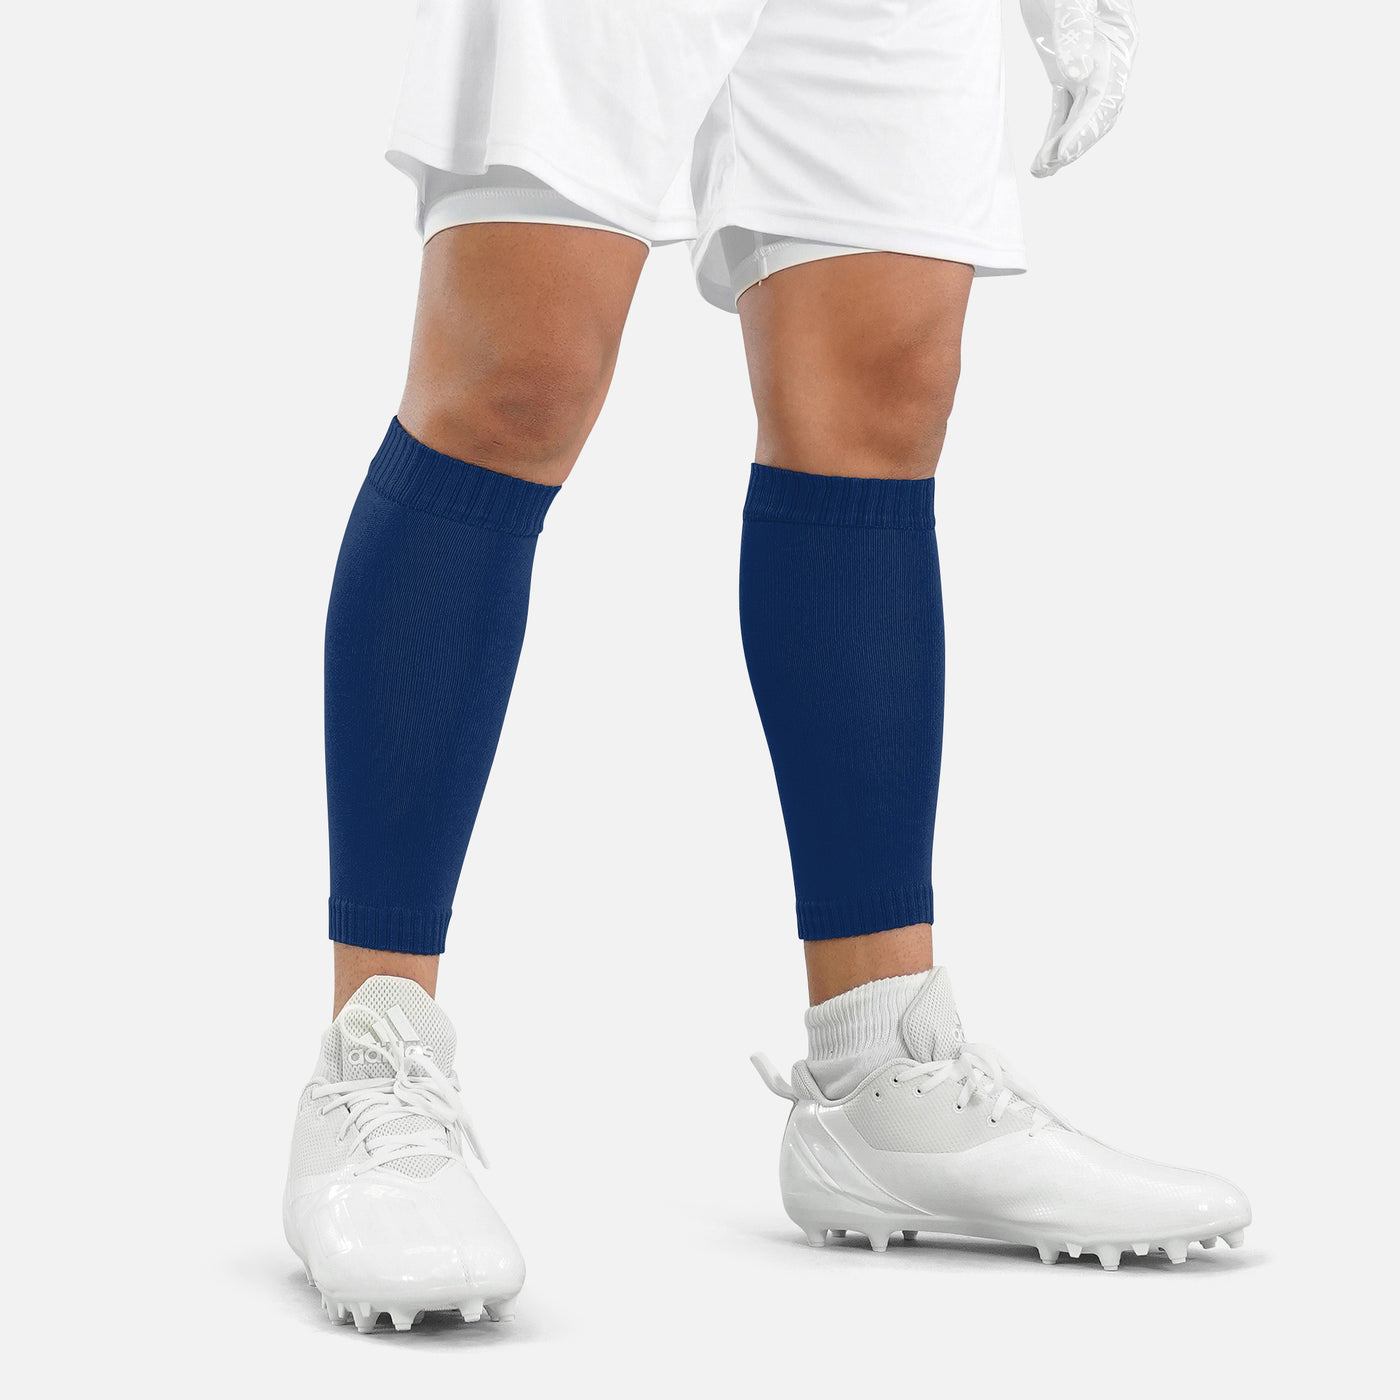 Hue Navy Knitted Compression Calf Sleeves